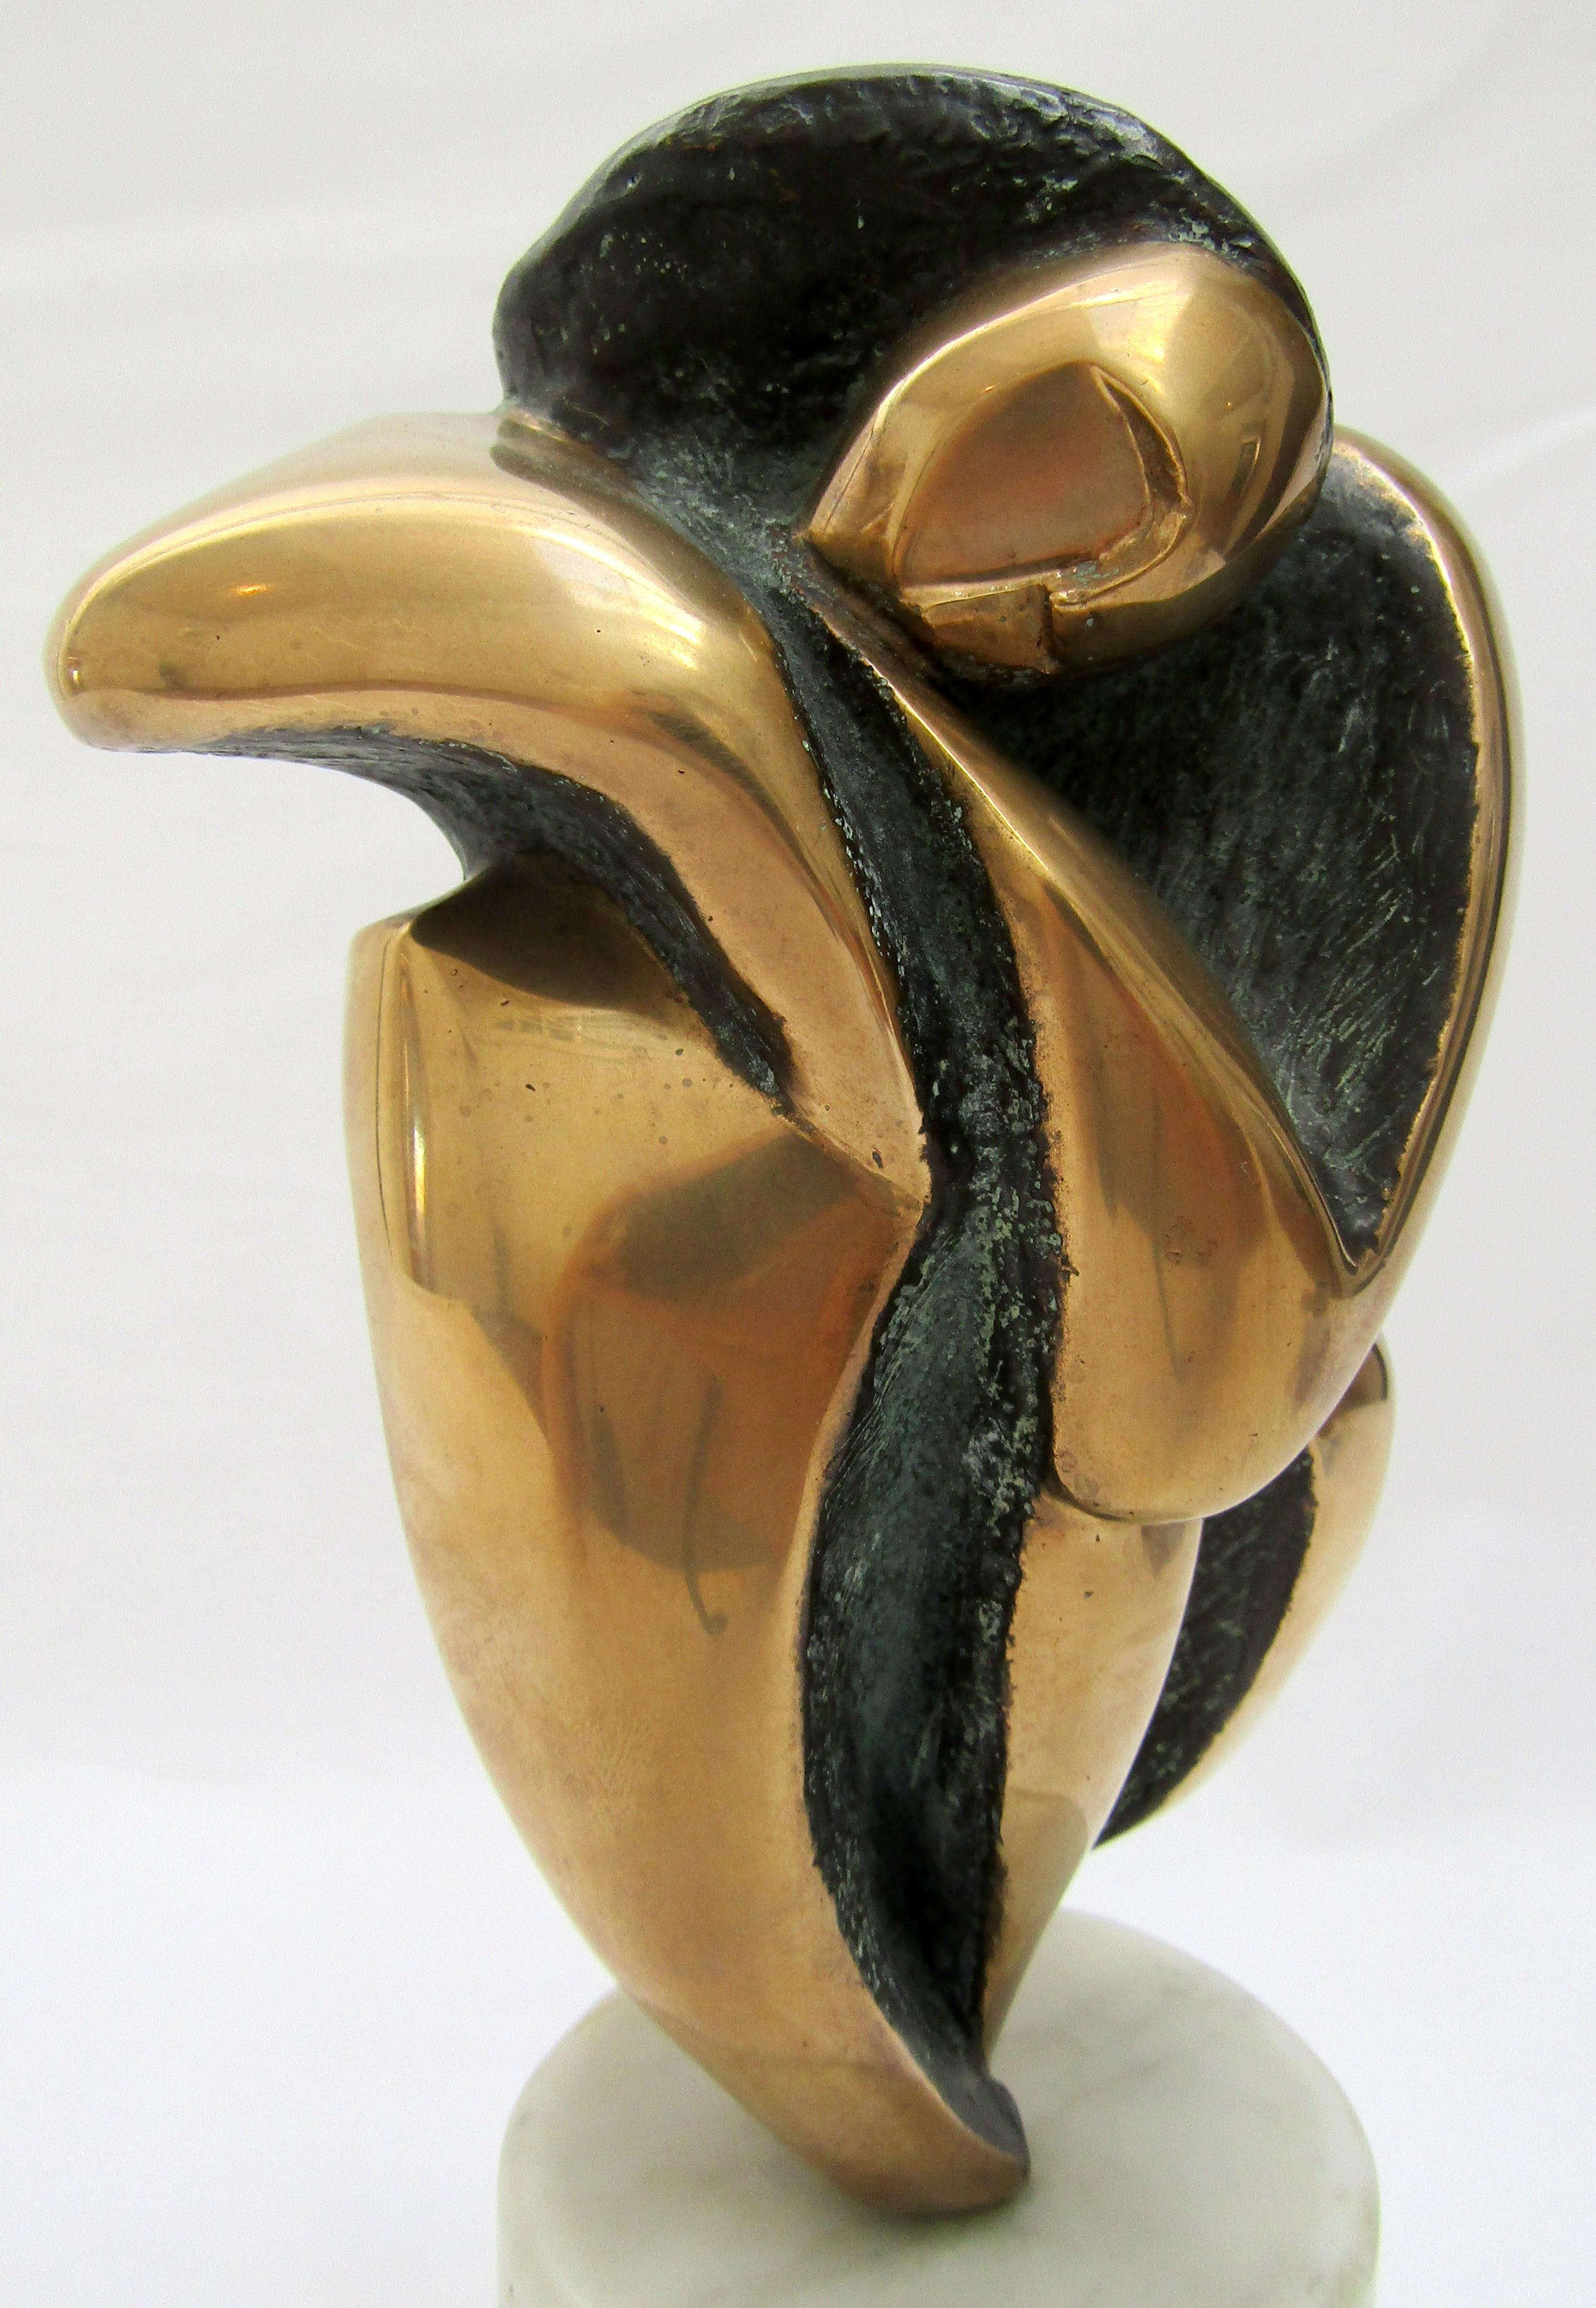 An abstract polished and patinated bronze
sculpture on a marble plinth
indistinctly signed and dated 1989
French.

Measures: Height 11 ¾ in / 29.5 cm.